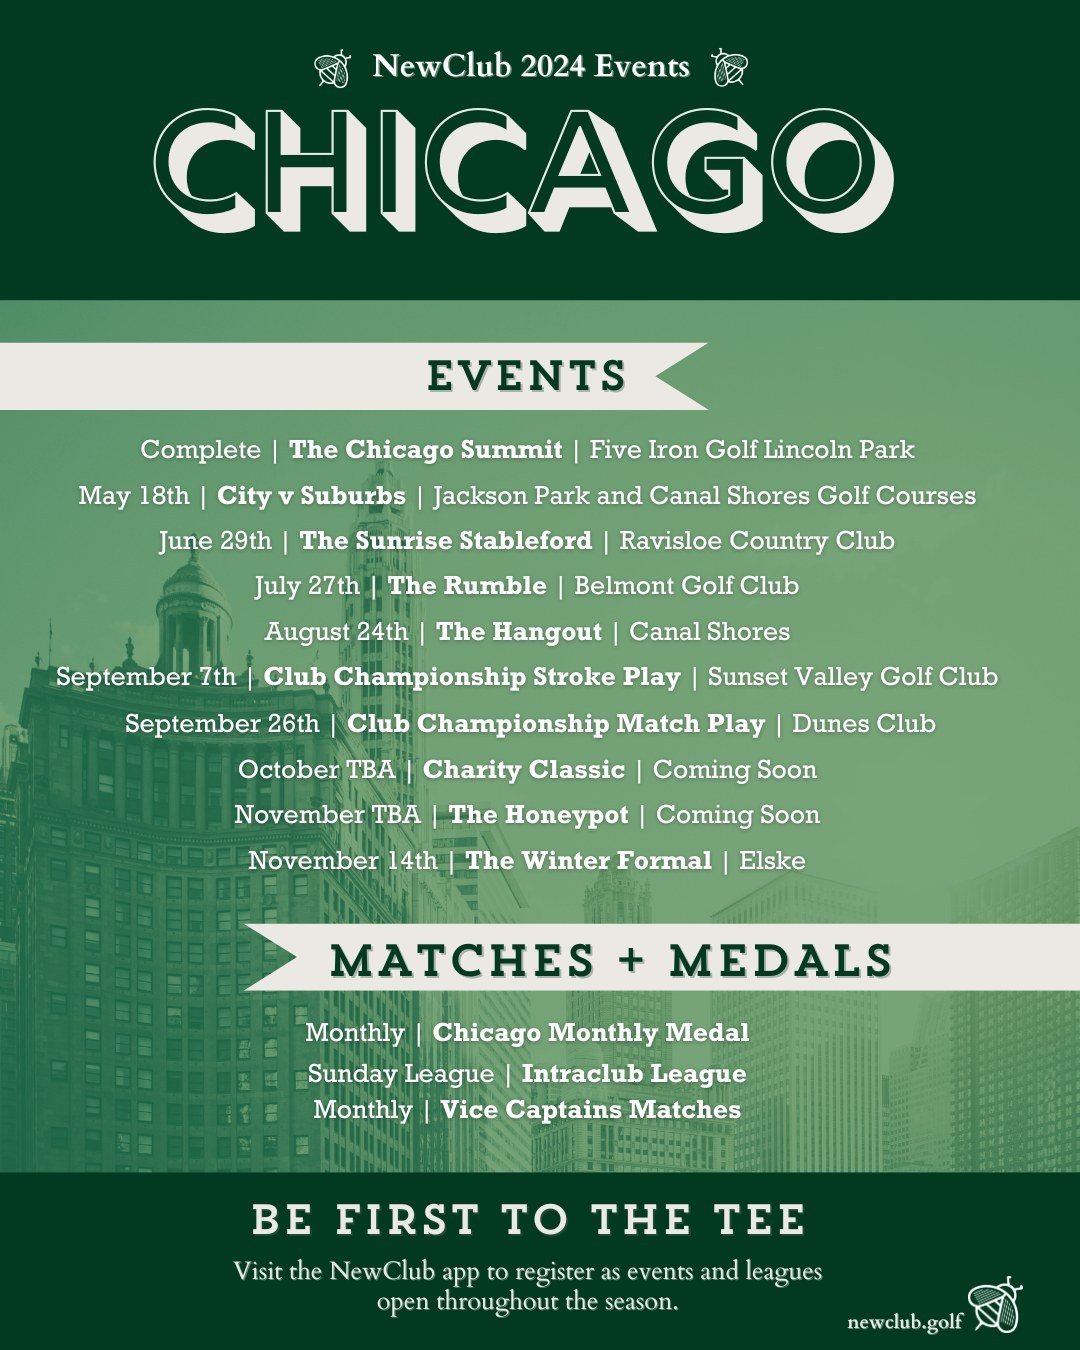 Our Chicago Chapter local events, matches, and medals schedule for 2024 is set!

Visit the Newclub app to register as events and leagues open throughout the season. 

#chicago #newclubgolfsociety #newclubchapterevents #playandpollinate